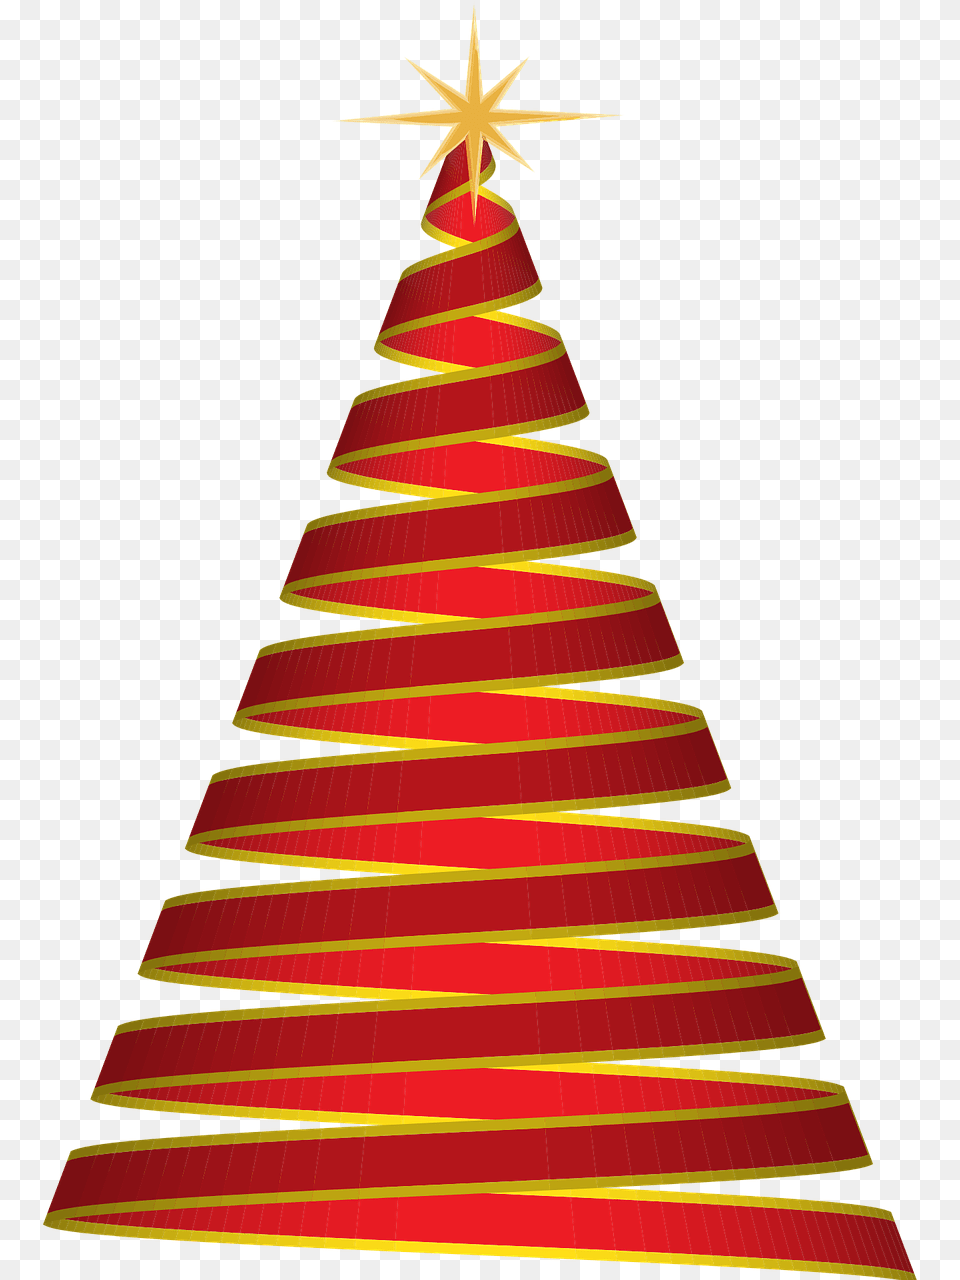 Red Christmas Tree, Clothing, Hat, Aircraft, Airplane Free Transparent Png